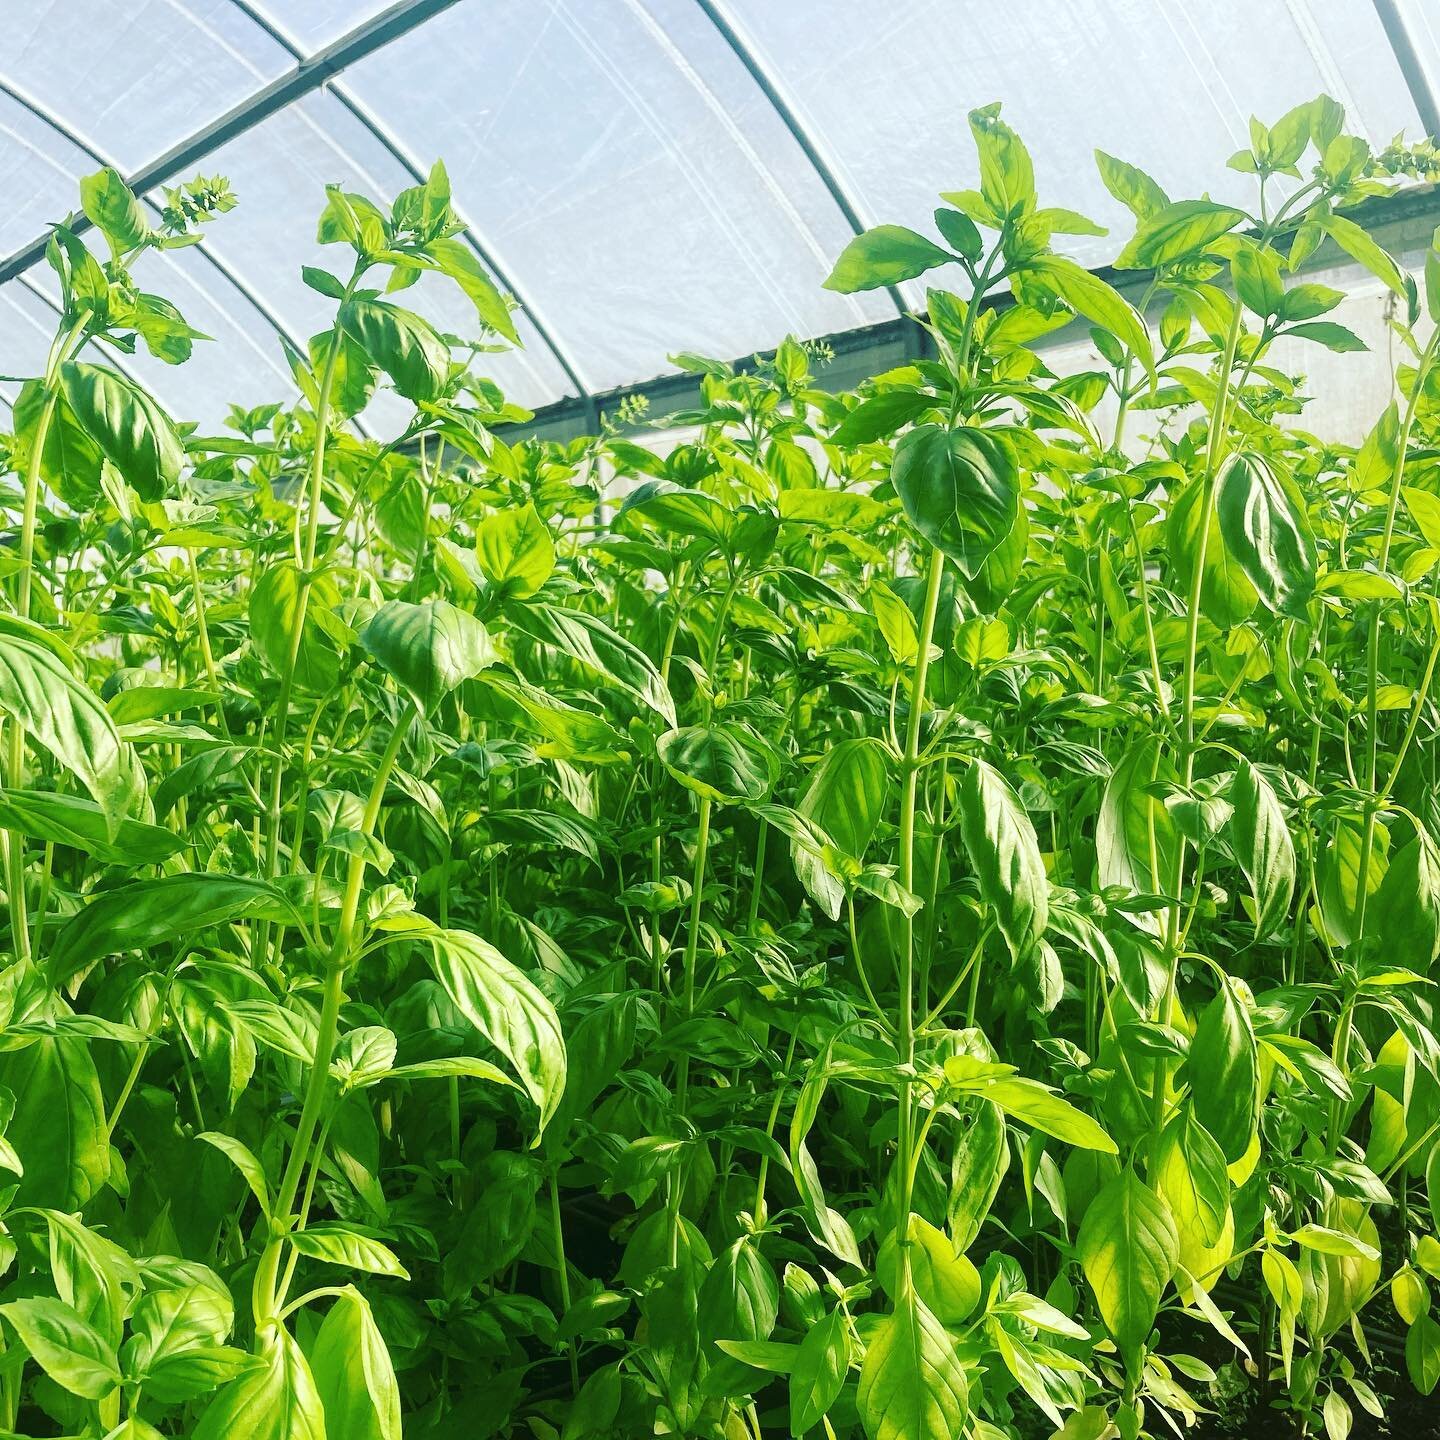 Have you thought about season extension? Growtunnels are a great way to keep crops going longer into the winter season and even all the way through. This is often when demand outstrips supply and farmers can get a better return on their yield. Farm s